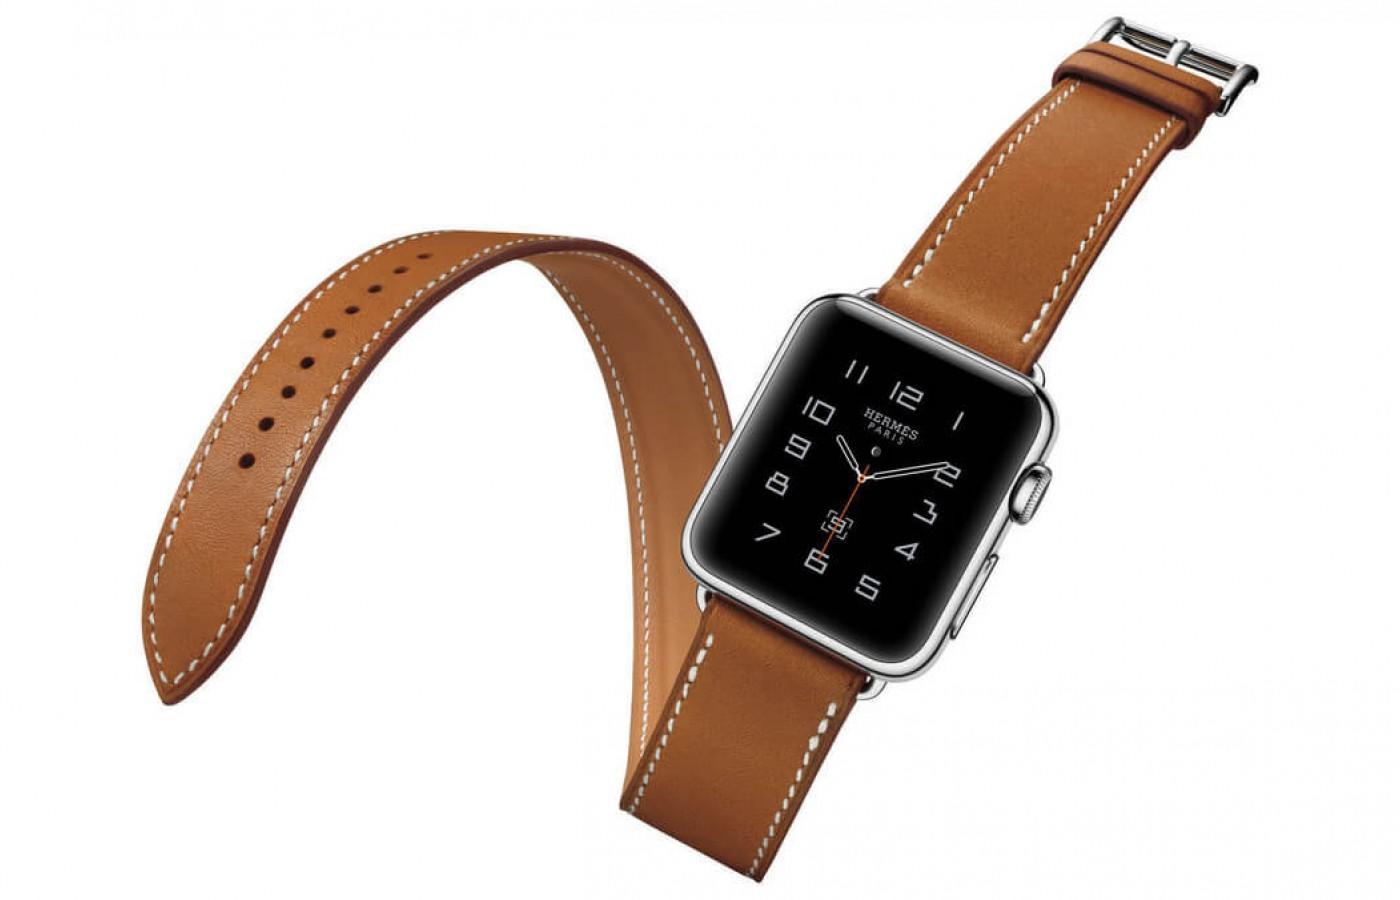 Apple Watch Hermes is classic yet new